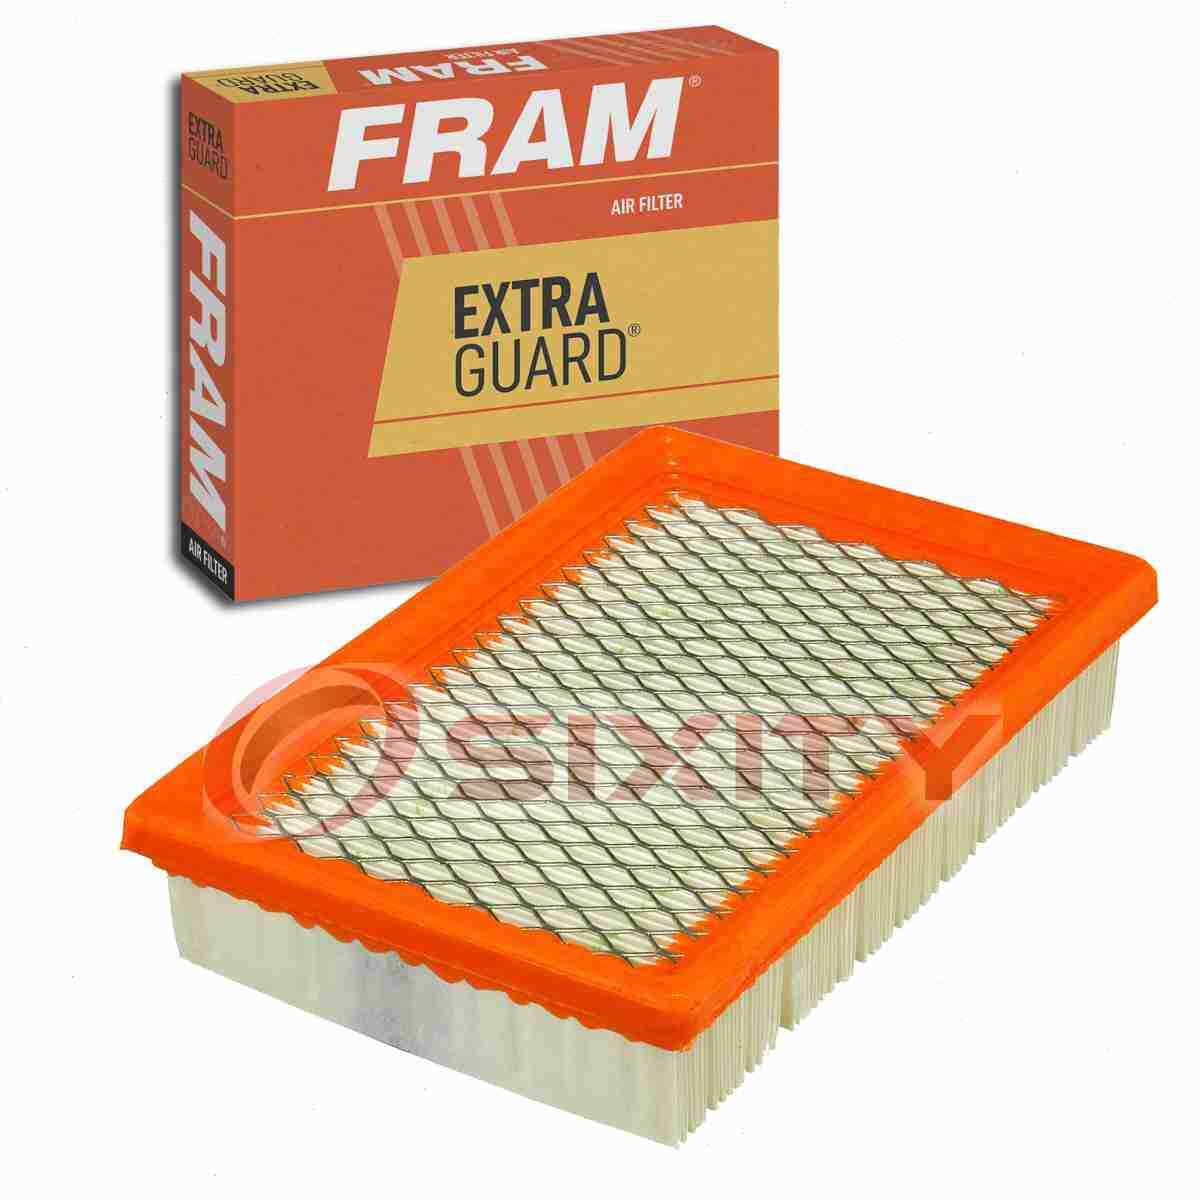 FRAM Extra Guard Air Filter for 1981-1987 Plymouth Horizon Intake Inlet hy